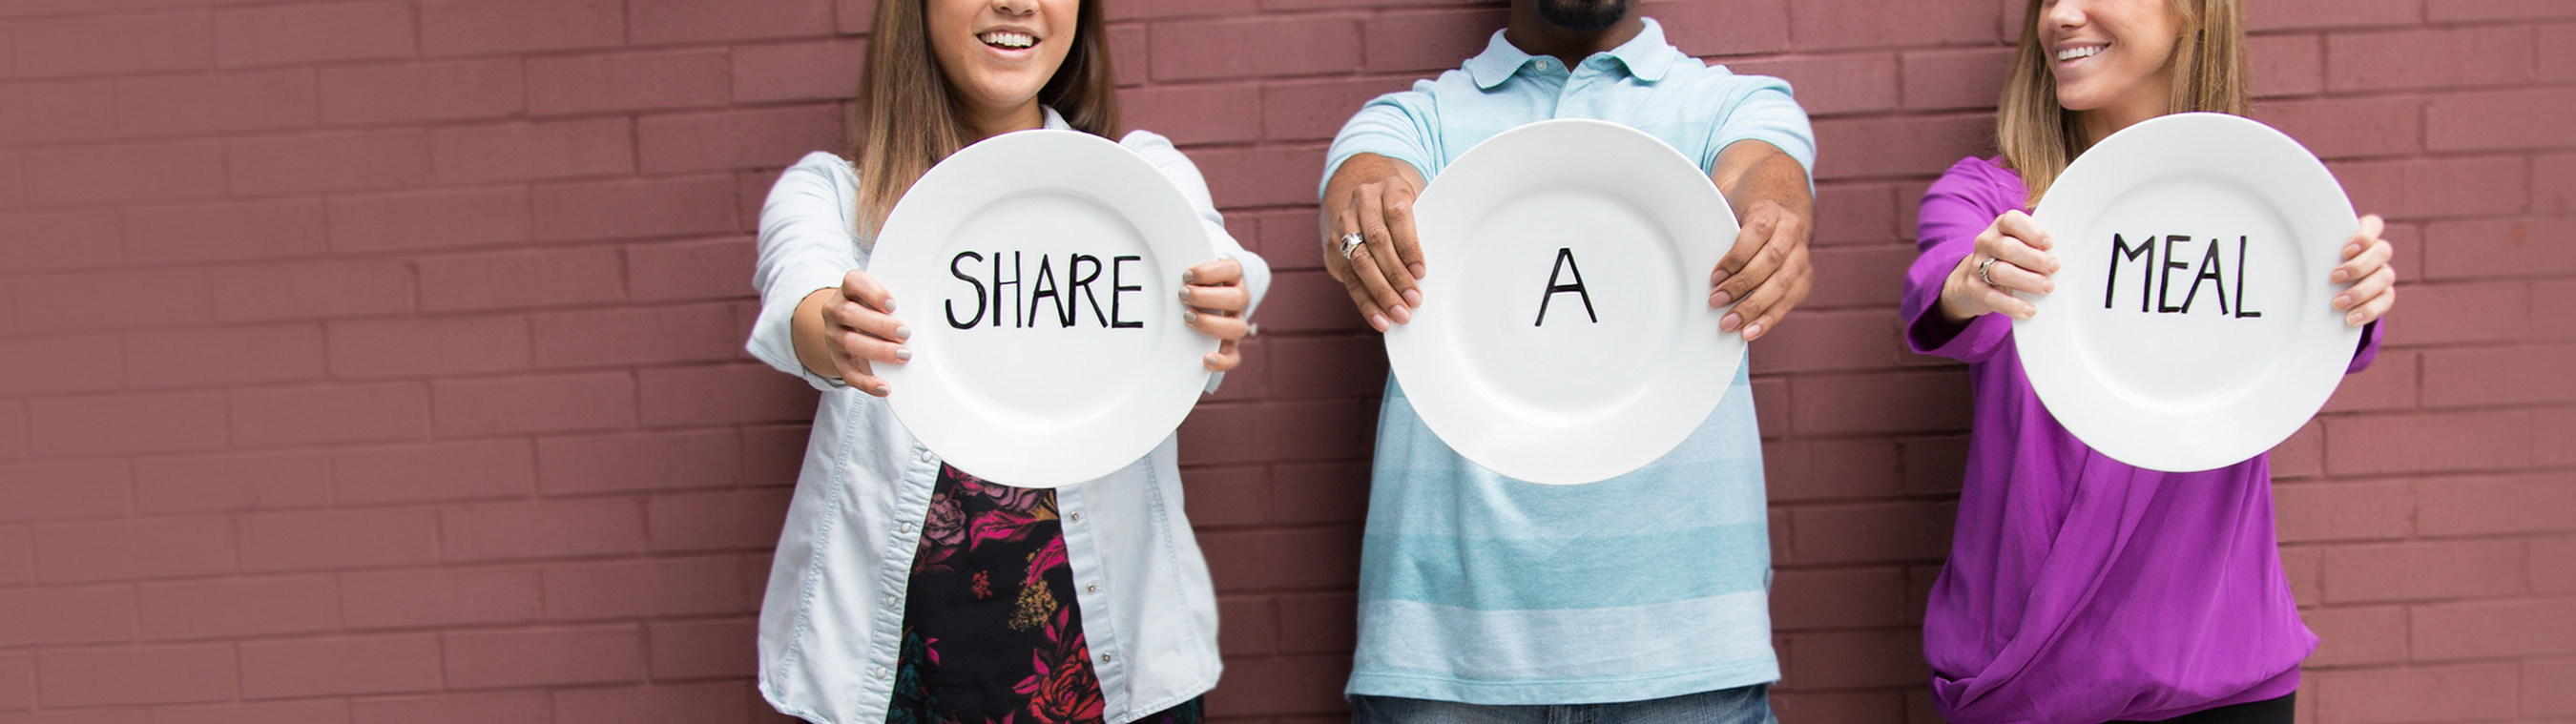 Unilever will donate one meal to Feeding America for every use of the #ShareAMeal hashtag